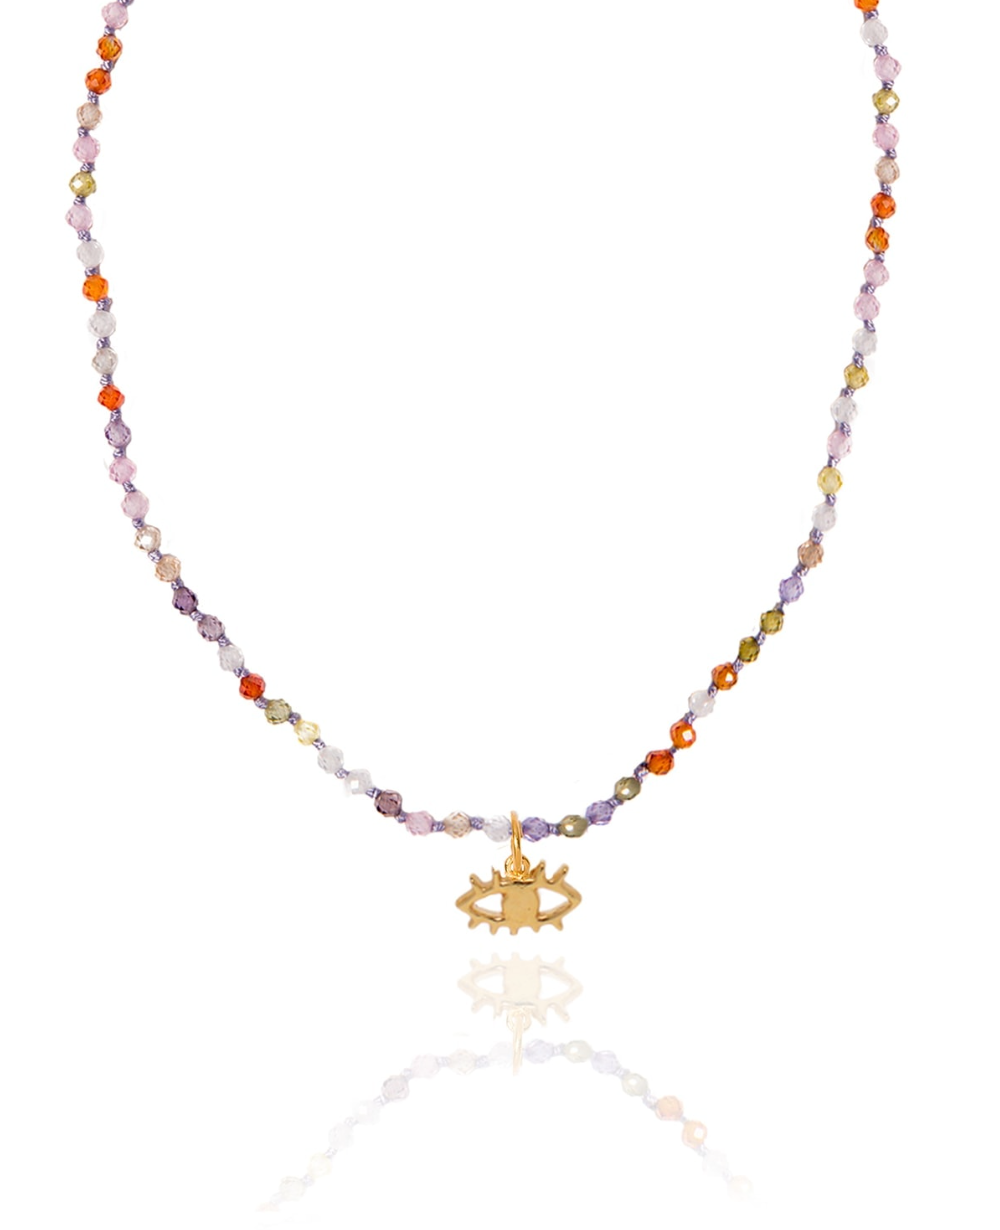 Wizard of Rainbows Knotted Eye Necklace